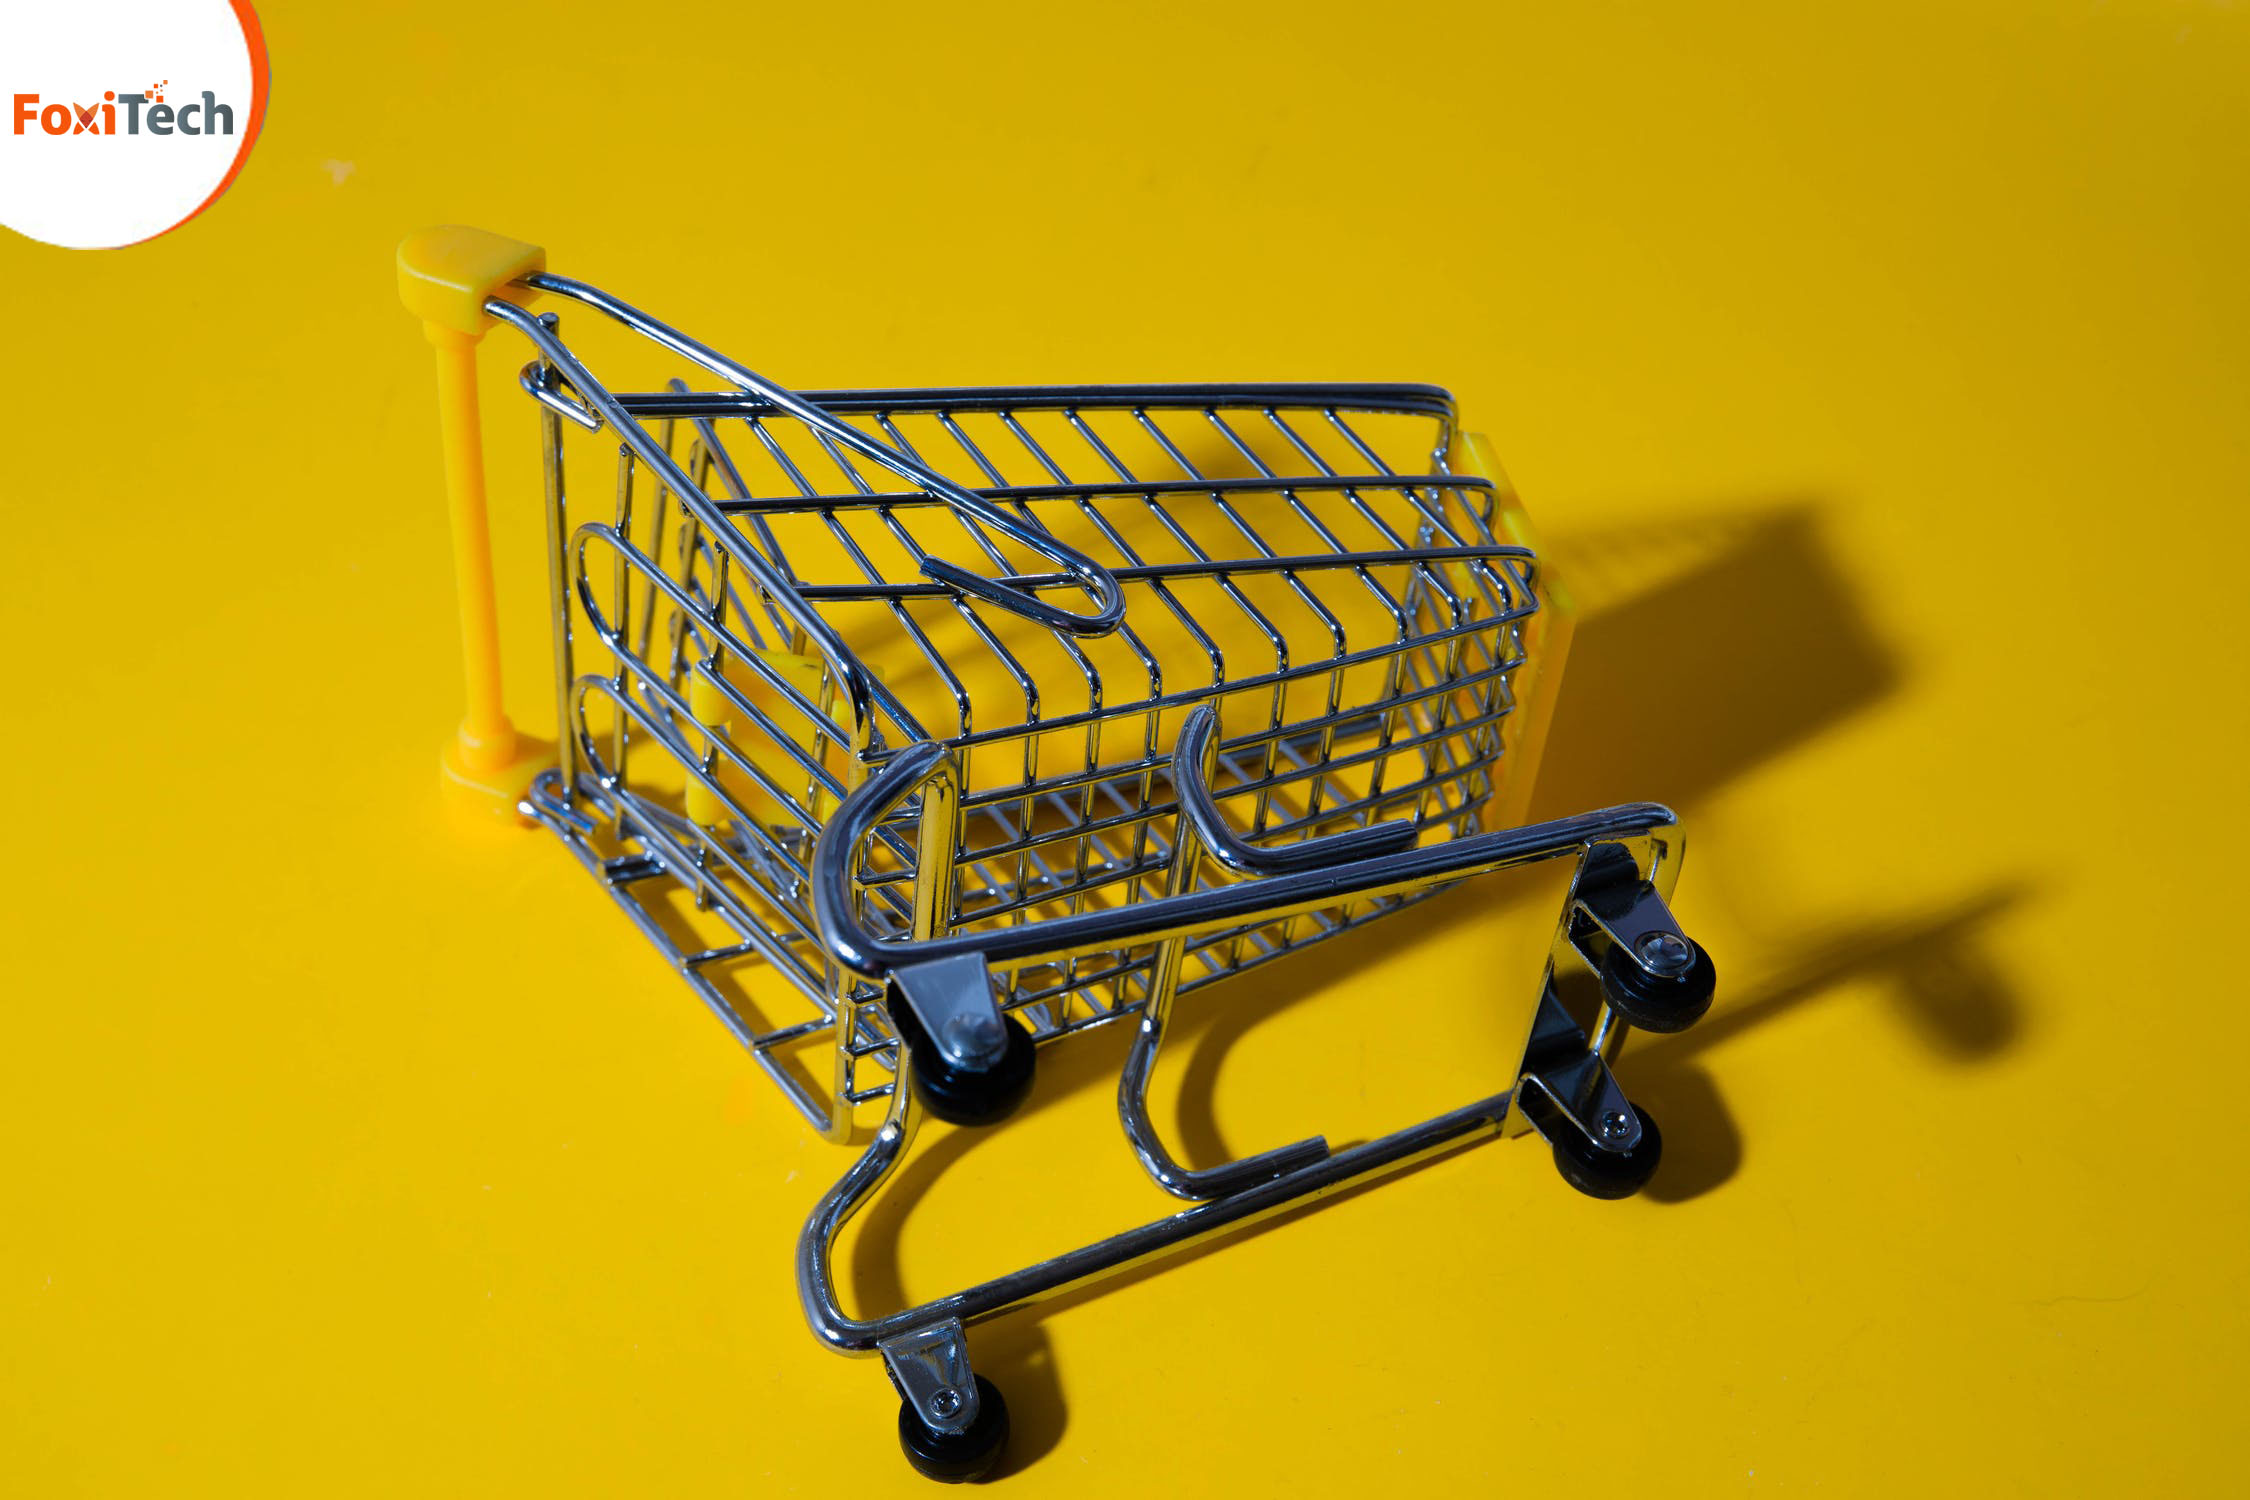 A toy shopping cart on its side on a yellow surface